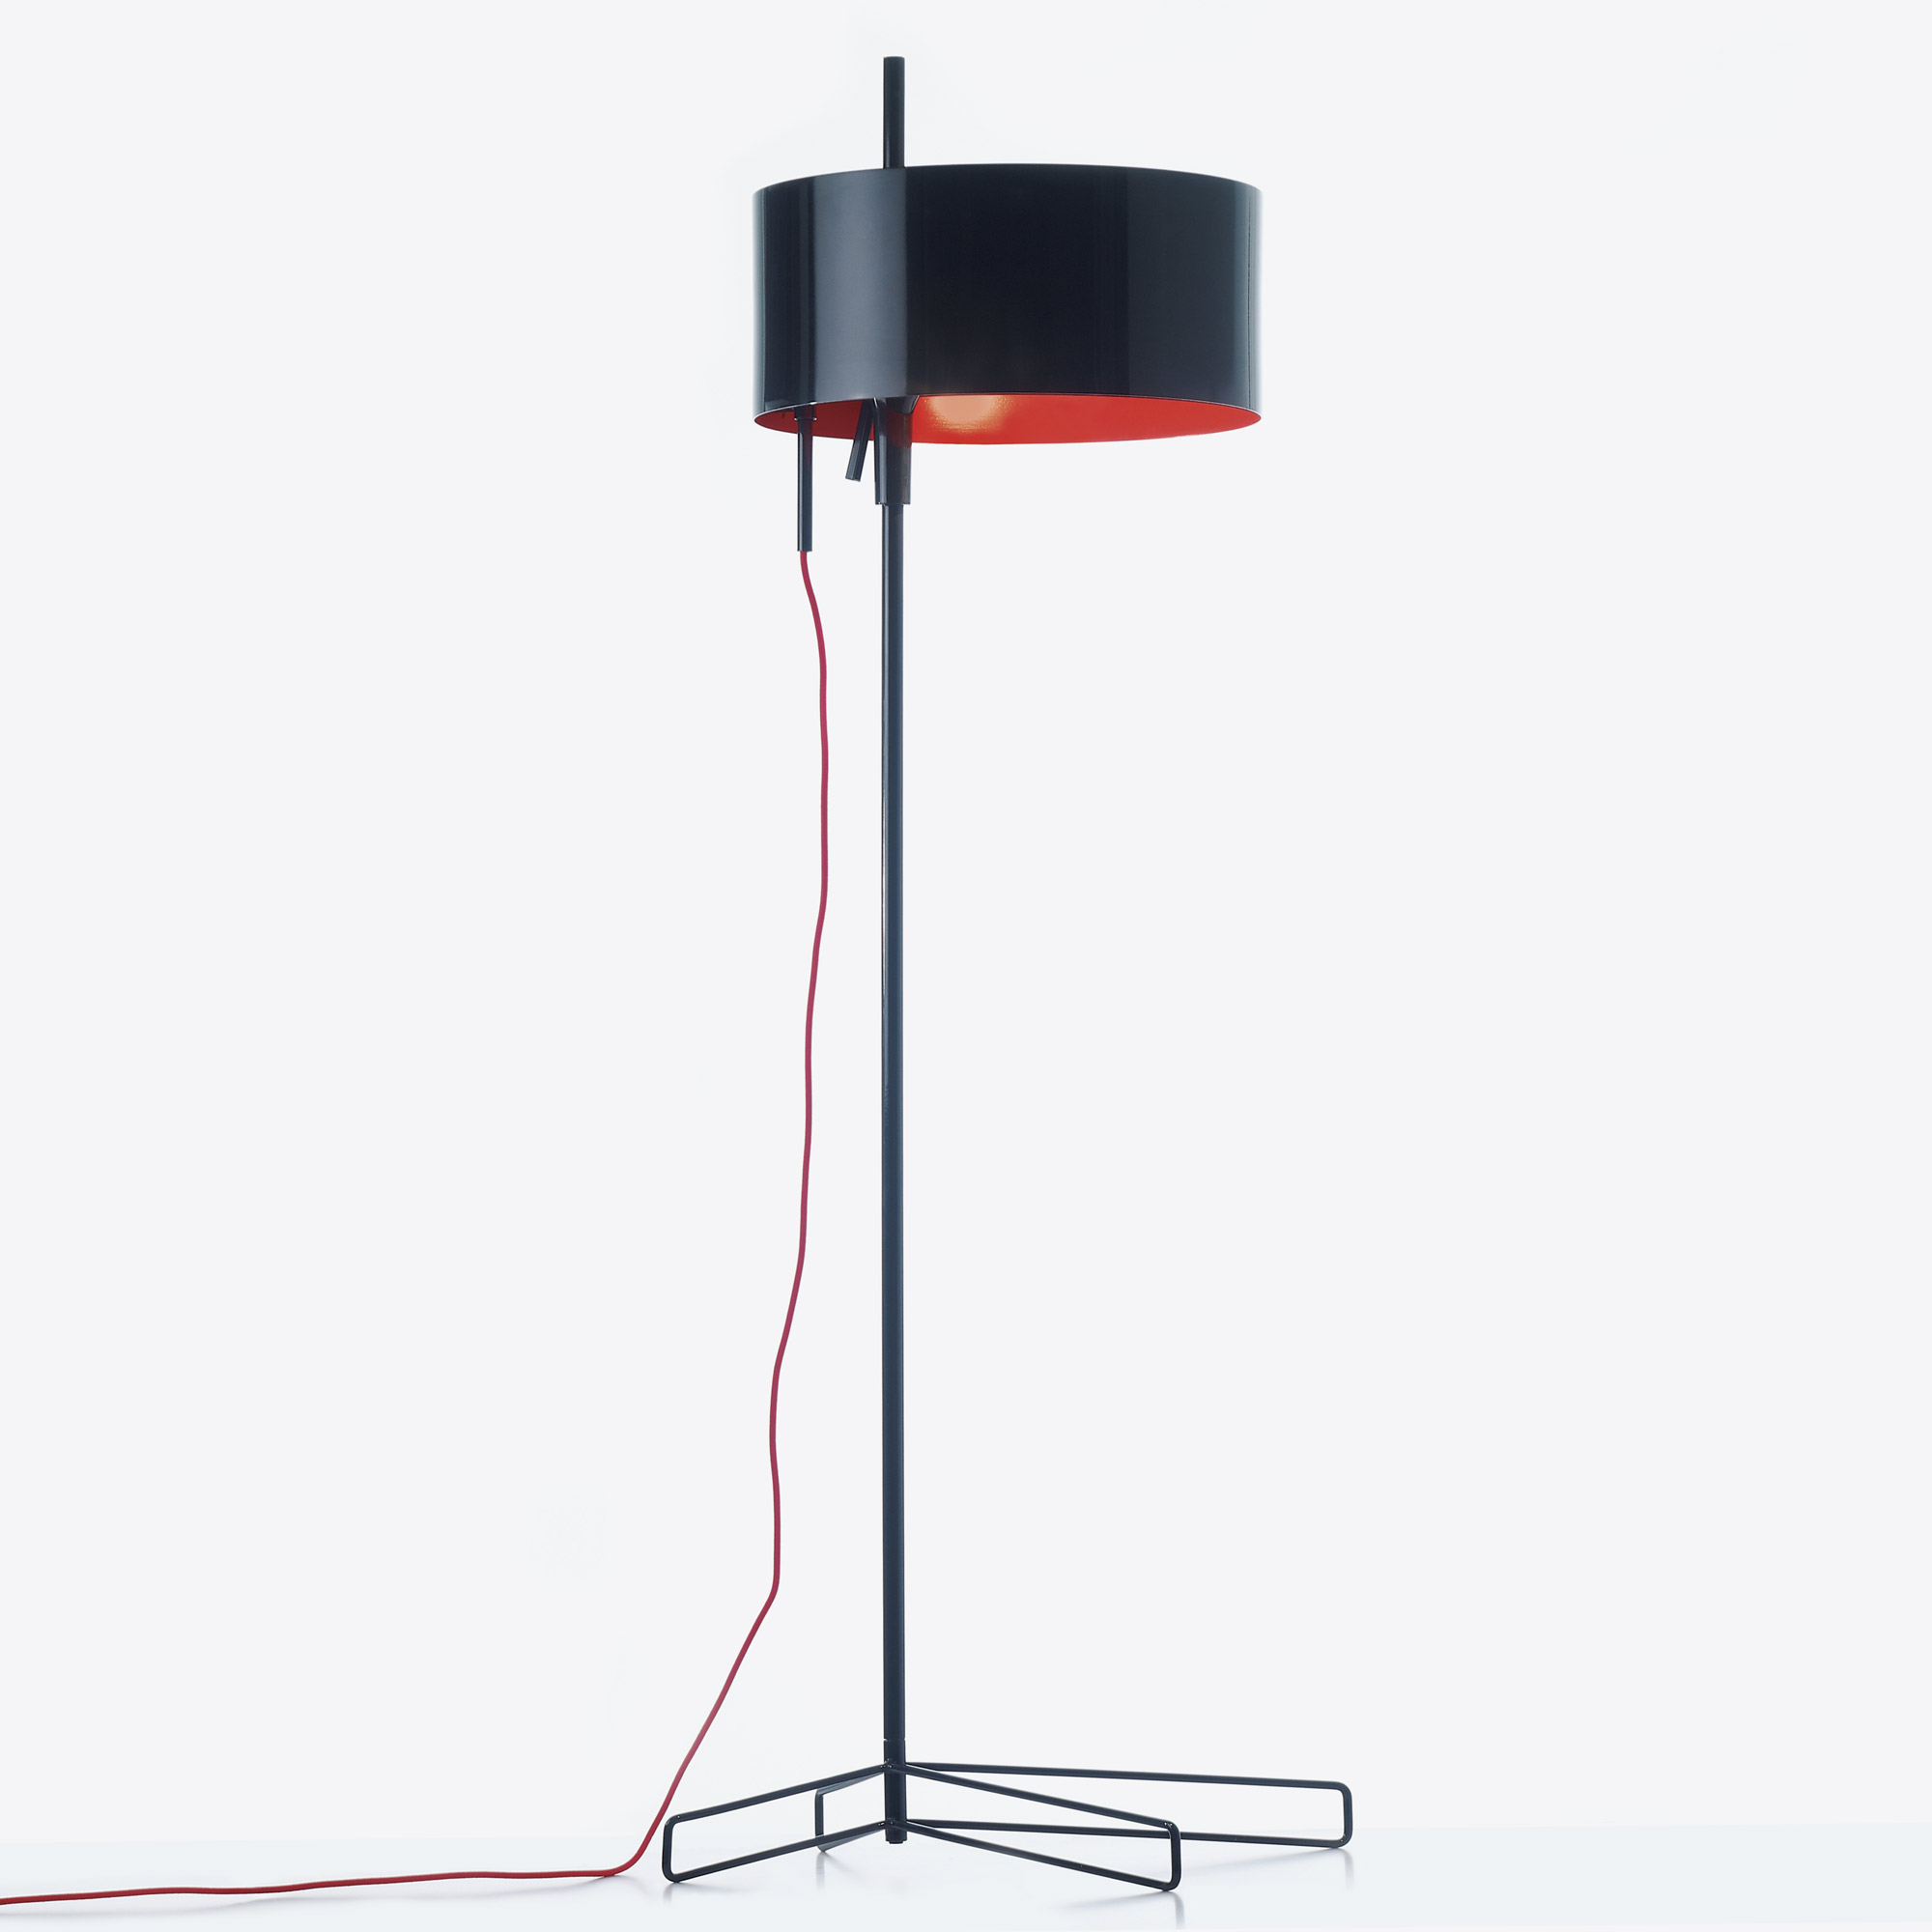 3G Lamp by Mario Ruiz for B Lux